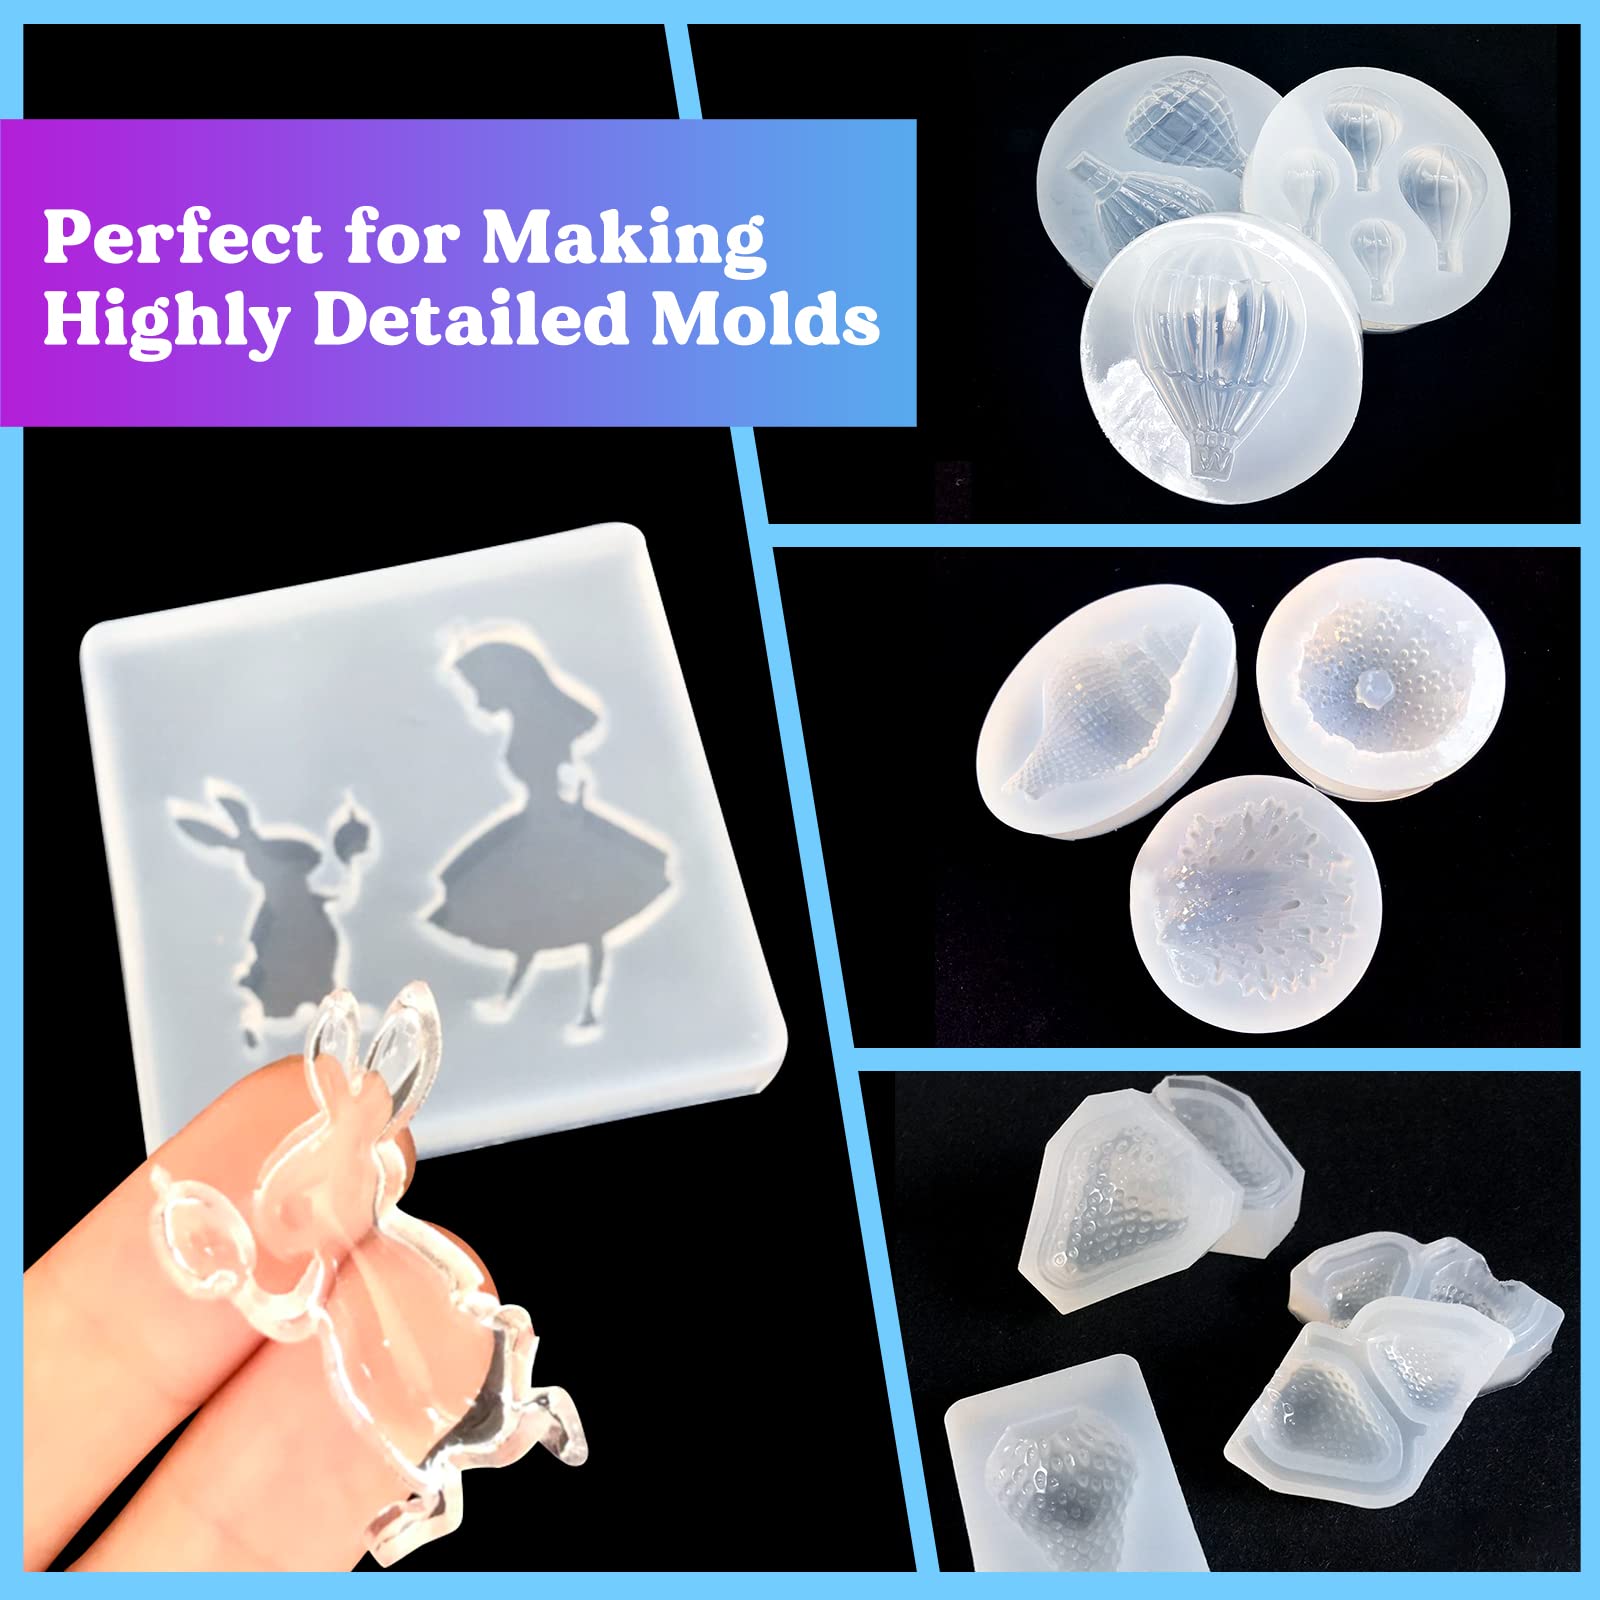 LET'S RESIN Silicone Mold Making Kit 63.48oz/3.968lbs,Non-Toxic Mold Making Silicone Rubber,Silicone Mold Maker,Clear Liquid Molding Silicone Kit for Resin Molds, Silicone Molds Making